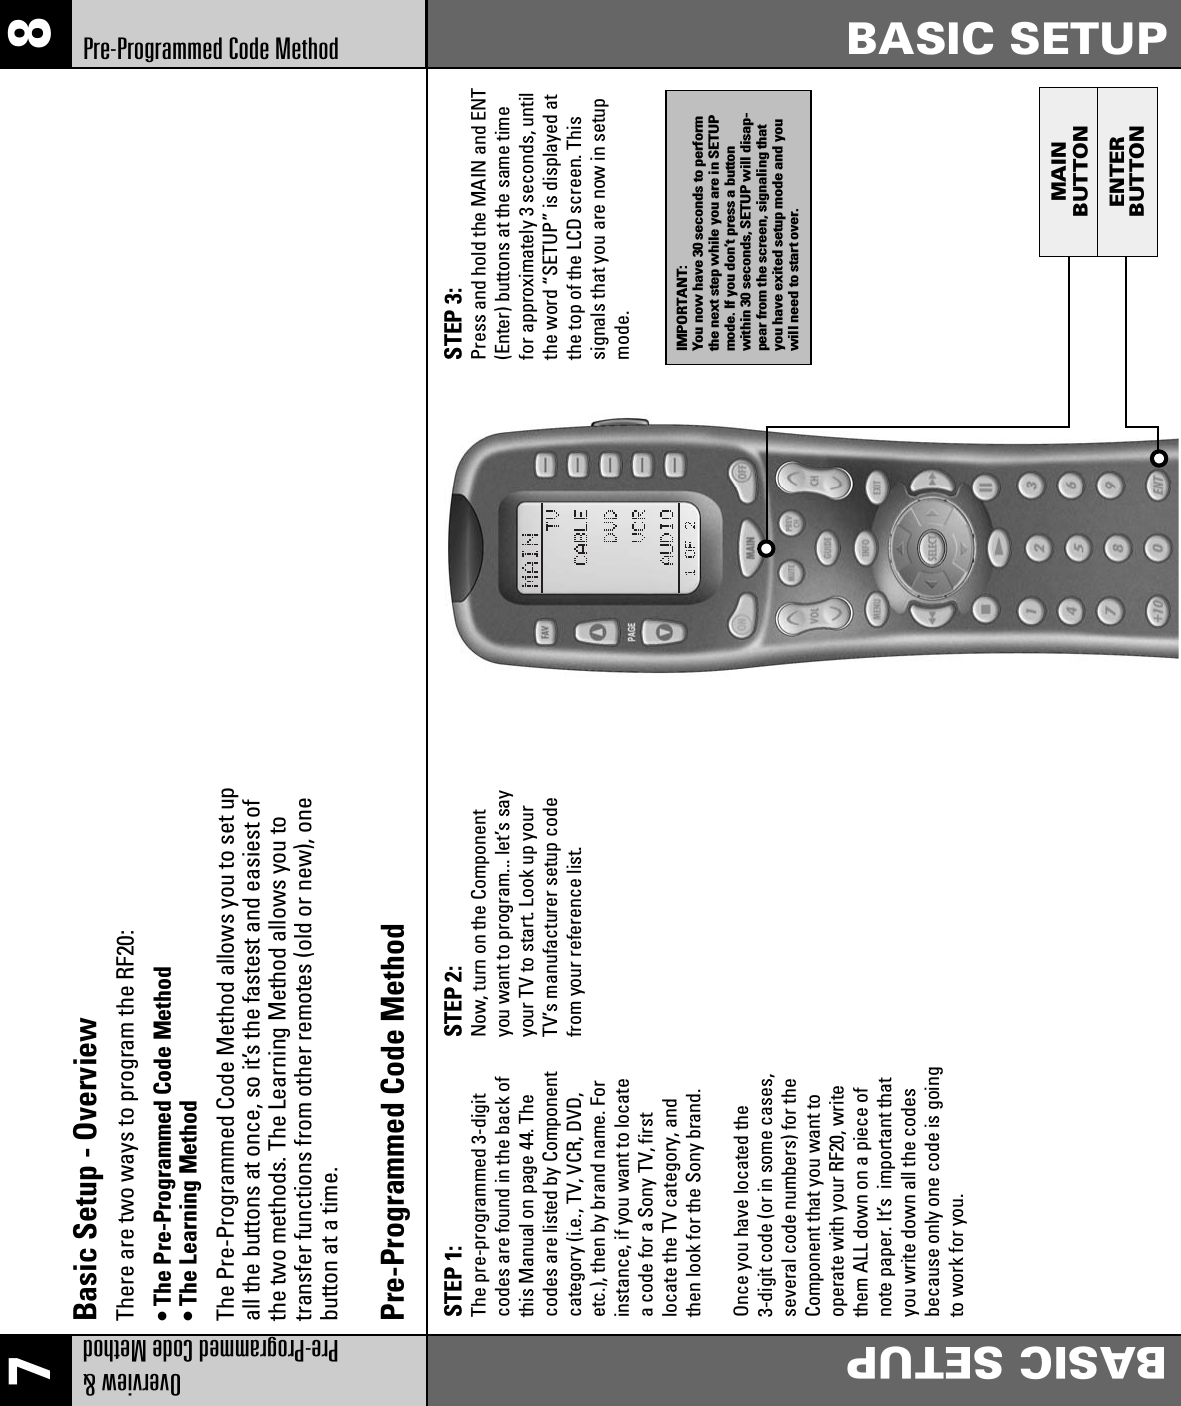 MAINENTERBUTTONBUTTON7 8Overview &amp; Pre-Programmed Code MethodBASIC SETUPBASIC SETUPPre-Programmed Code MethodSTEP 1: The pre-programmed 3-digitcodes are found in the back ofthis Manual on page 44. Thecodes are listed by Componentcategory (i.e., TV, VCR, DVD,etc.), then by brand name. Forinstance, if you want to locatea code for a Sony TV, firstlocate the TV category, andthen look for the Sony brand.Once you have located the3-digit code (or in some cases,several code numbers) for theComponent that you want tooperate with your RF20, writethem ALL down on a piece ofnote paper. It’s  important thatyou write down all the codesbecause only one code is goingto work for you.STEP 2: Now, turn on the Componentyou want to program... let’s sayyour TV to start. Look up yourTV’s manufacturer setup codefrom your reference list.STEP 3: Press and hold the MAIN and ENT(Enter) buttons at the same timefor approximately 3 seconds, untilthe word “SETUP” is displayed atthe top of the LCD screen. Thissignals that you are now in setupmode.Pre-Programmed Code MethodBasic Setup - OverviewThere are two ways to program the RF20:• The Pre-Programmed Code Method• The Learning MethodThe Pre-Programmed Code Method allows you to set upall the buttons at once, so it’s the fastest and easiest ofthe two methods. The Learning Method allows you totransfer functions from other remotes (old or new), onebutton at a time.IMPORTANT:You now have 30 seconds to performthe next step while you are in SETUPmode. If you don’t press a buttonwithin 30 seconds, SETUP will disap-pear from the screen, signaling thatyou have exited setup mode and youwill need to start over.